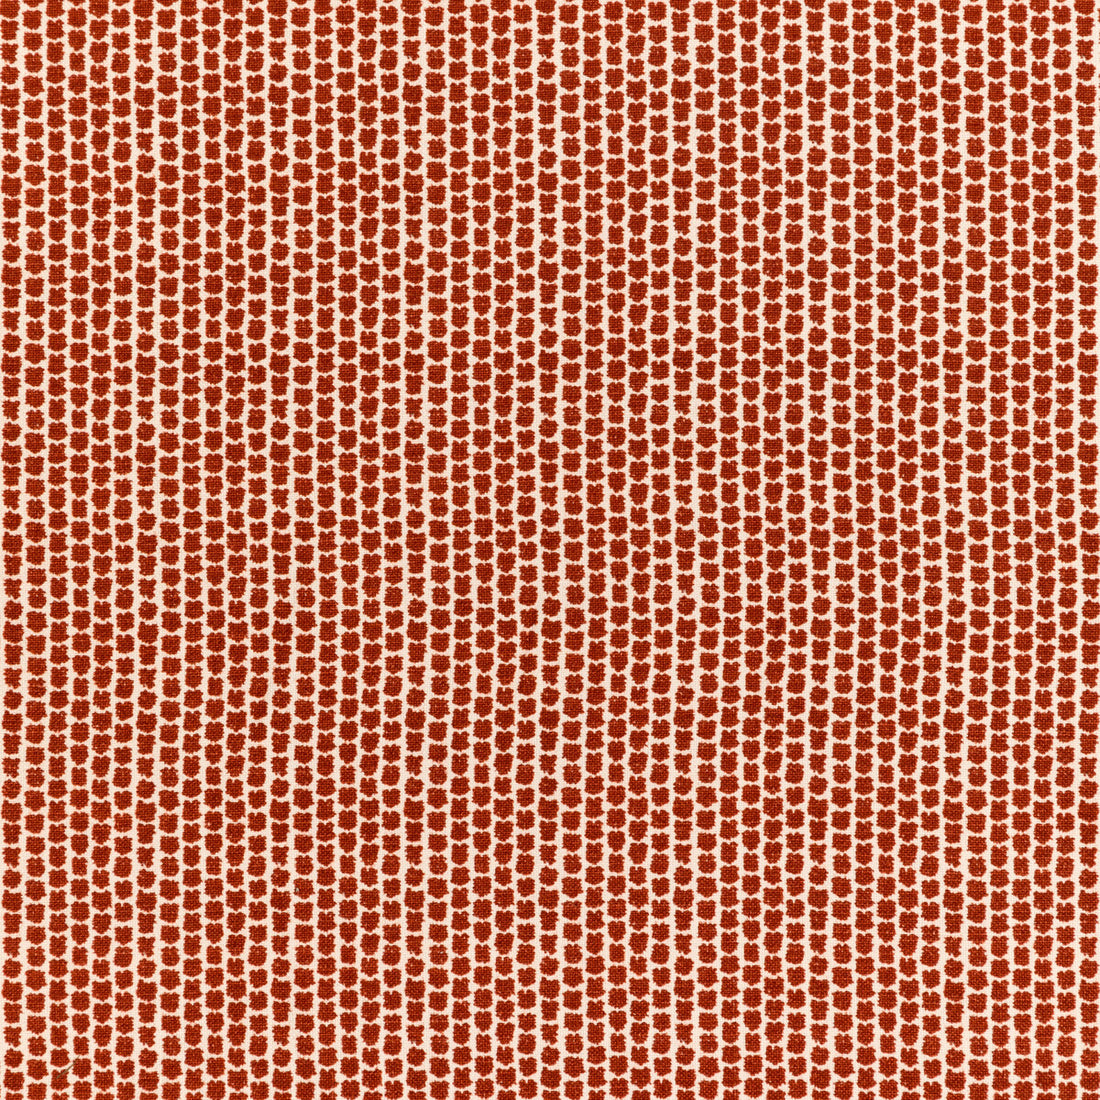 Kaya fabric in paprika color - pattern 2012101.24.0 - by Lee Jofa in the Breckenridge collection